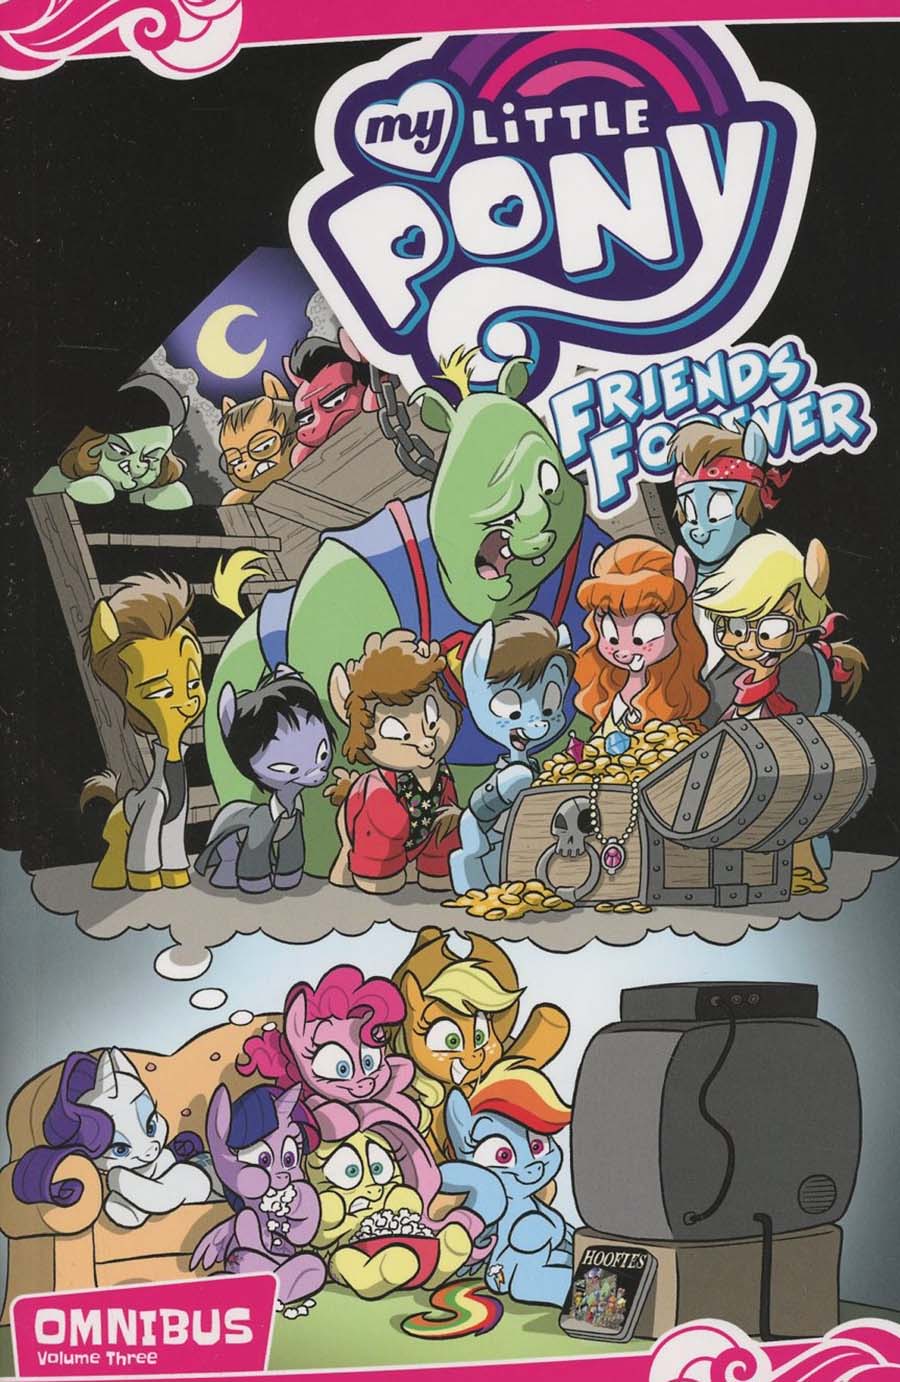 My Little Pony Friends Forever Omnibus Vol 3 TP